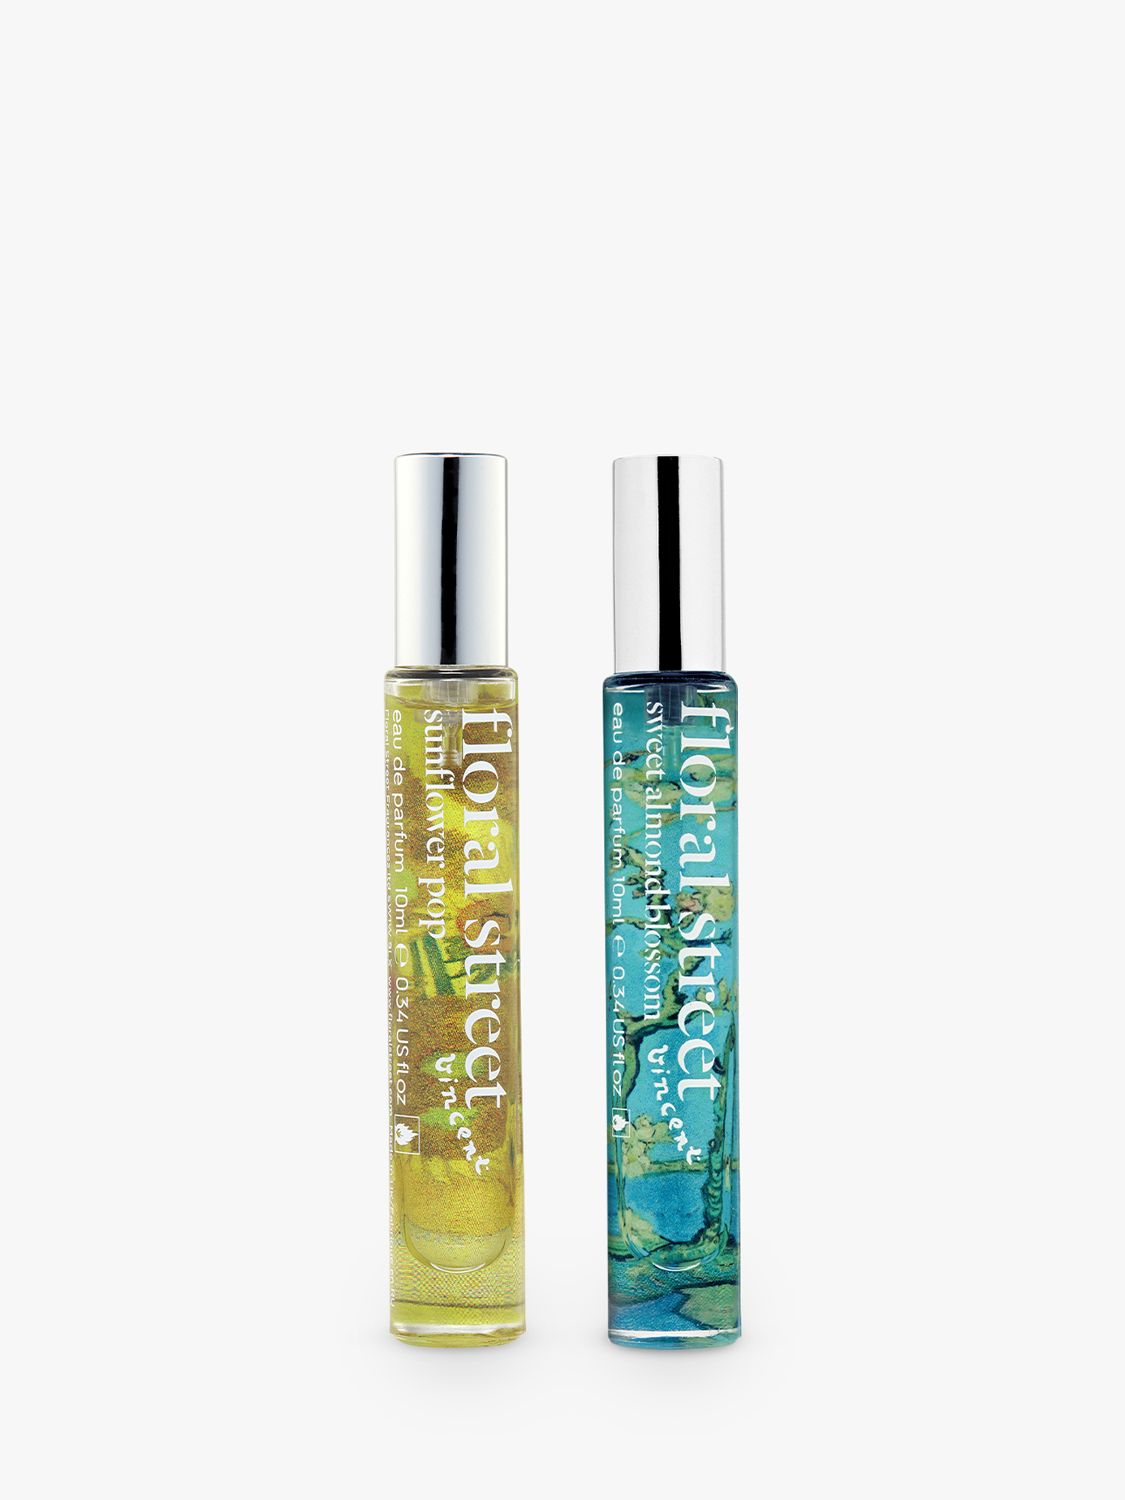 Floral Street x Van Gogh Museum Sunflower Pop and Sweet Almond Blossom Travel Duo Fragrance Gift Set 2